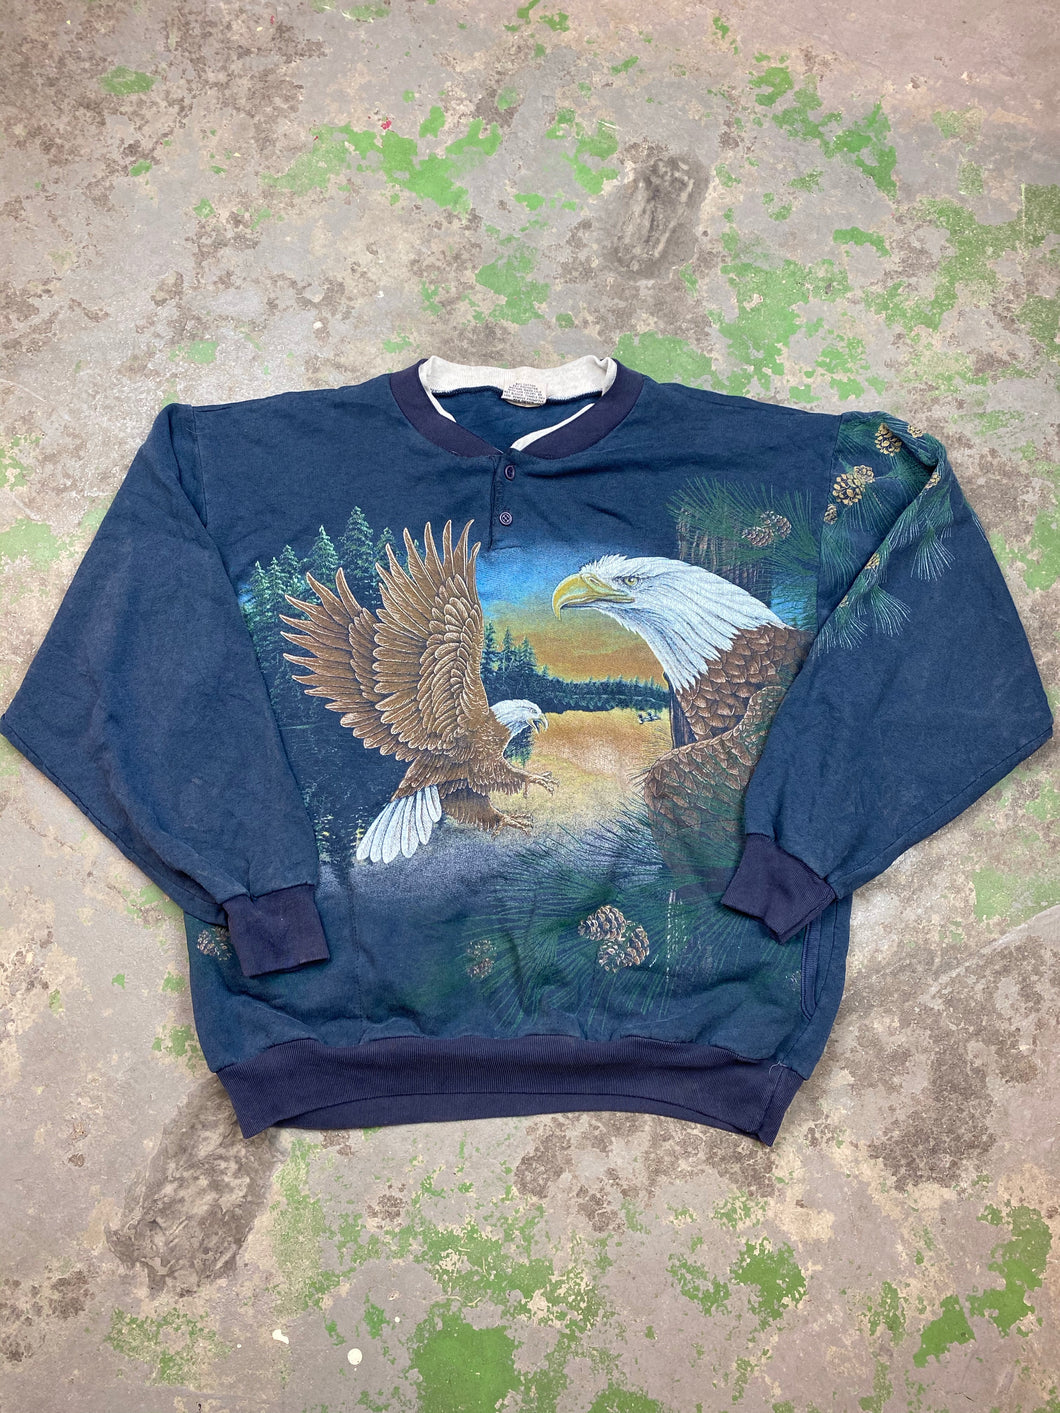 Front and and back Hawk crewneck